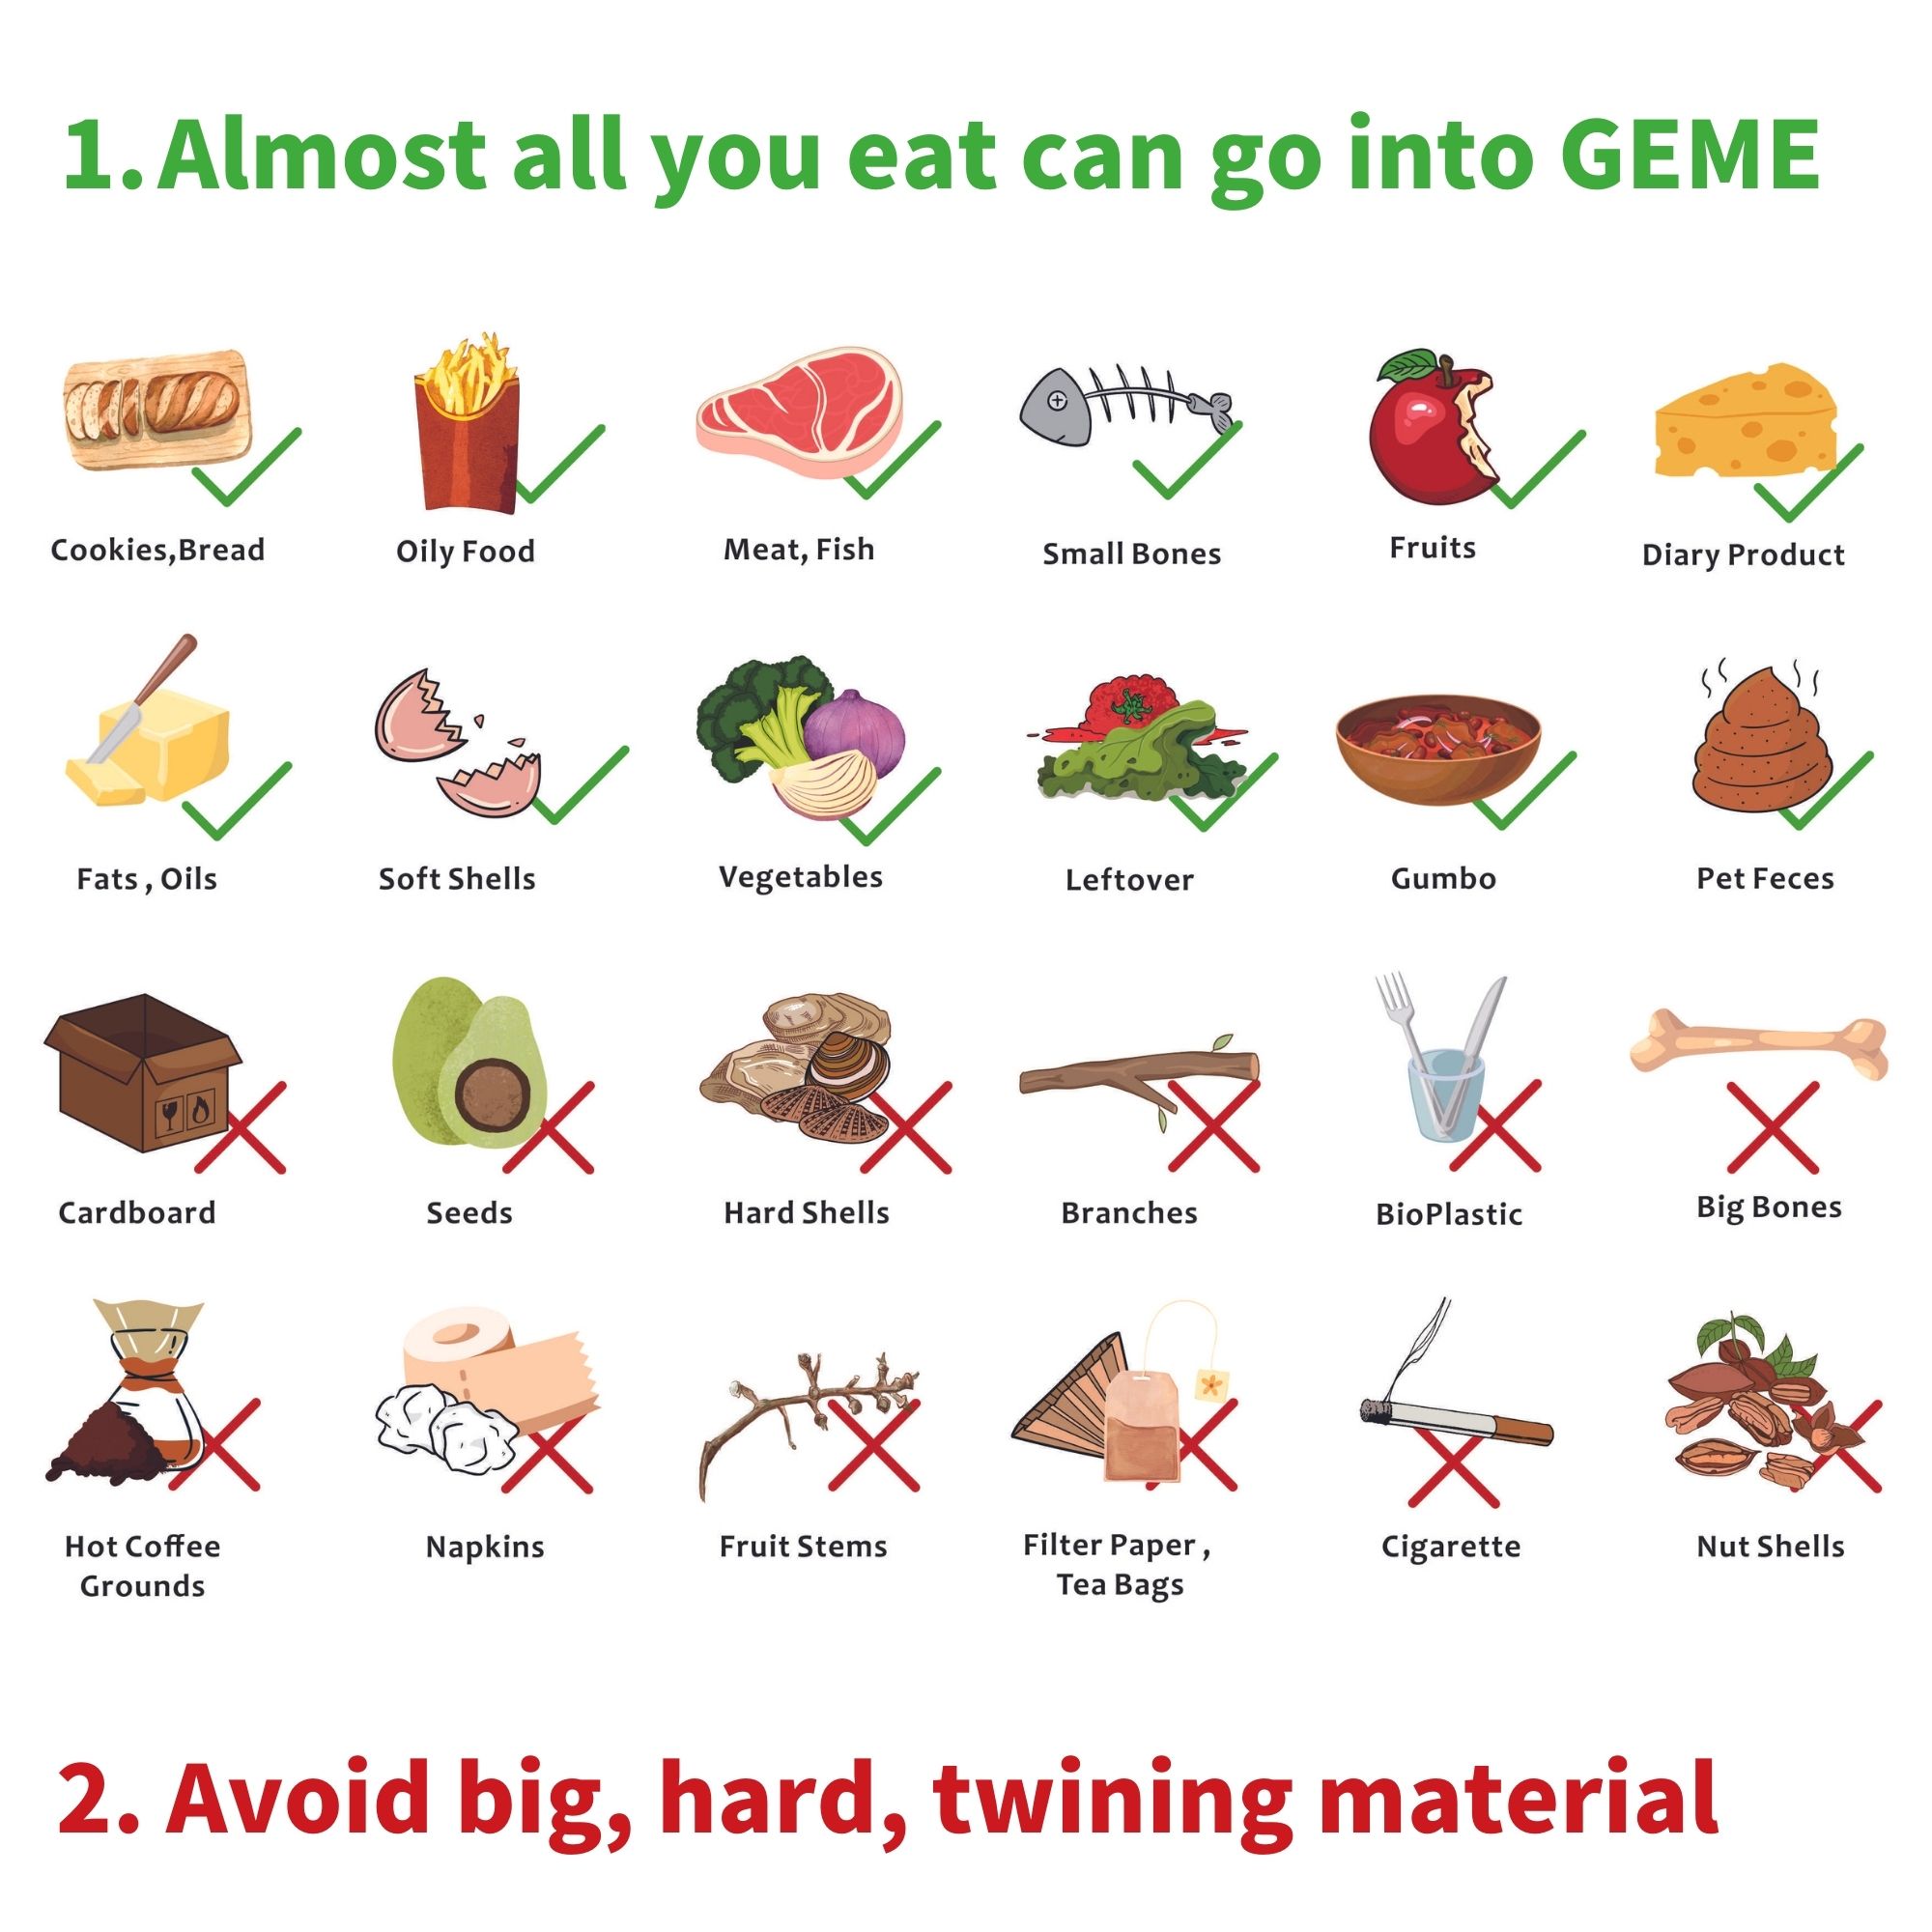 What can GEME compost